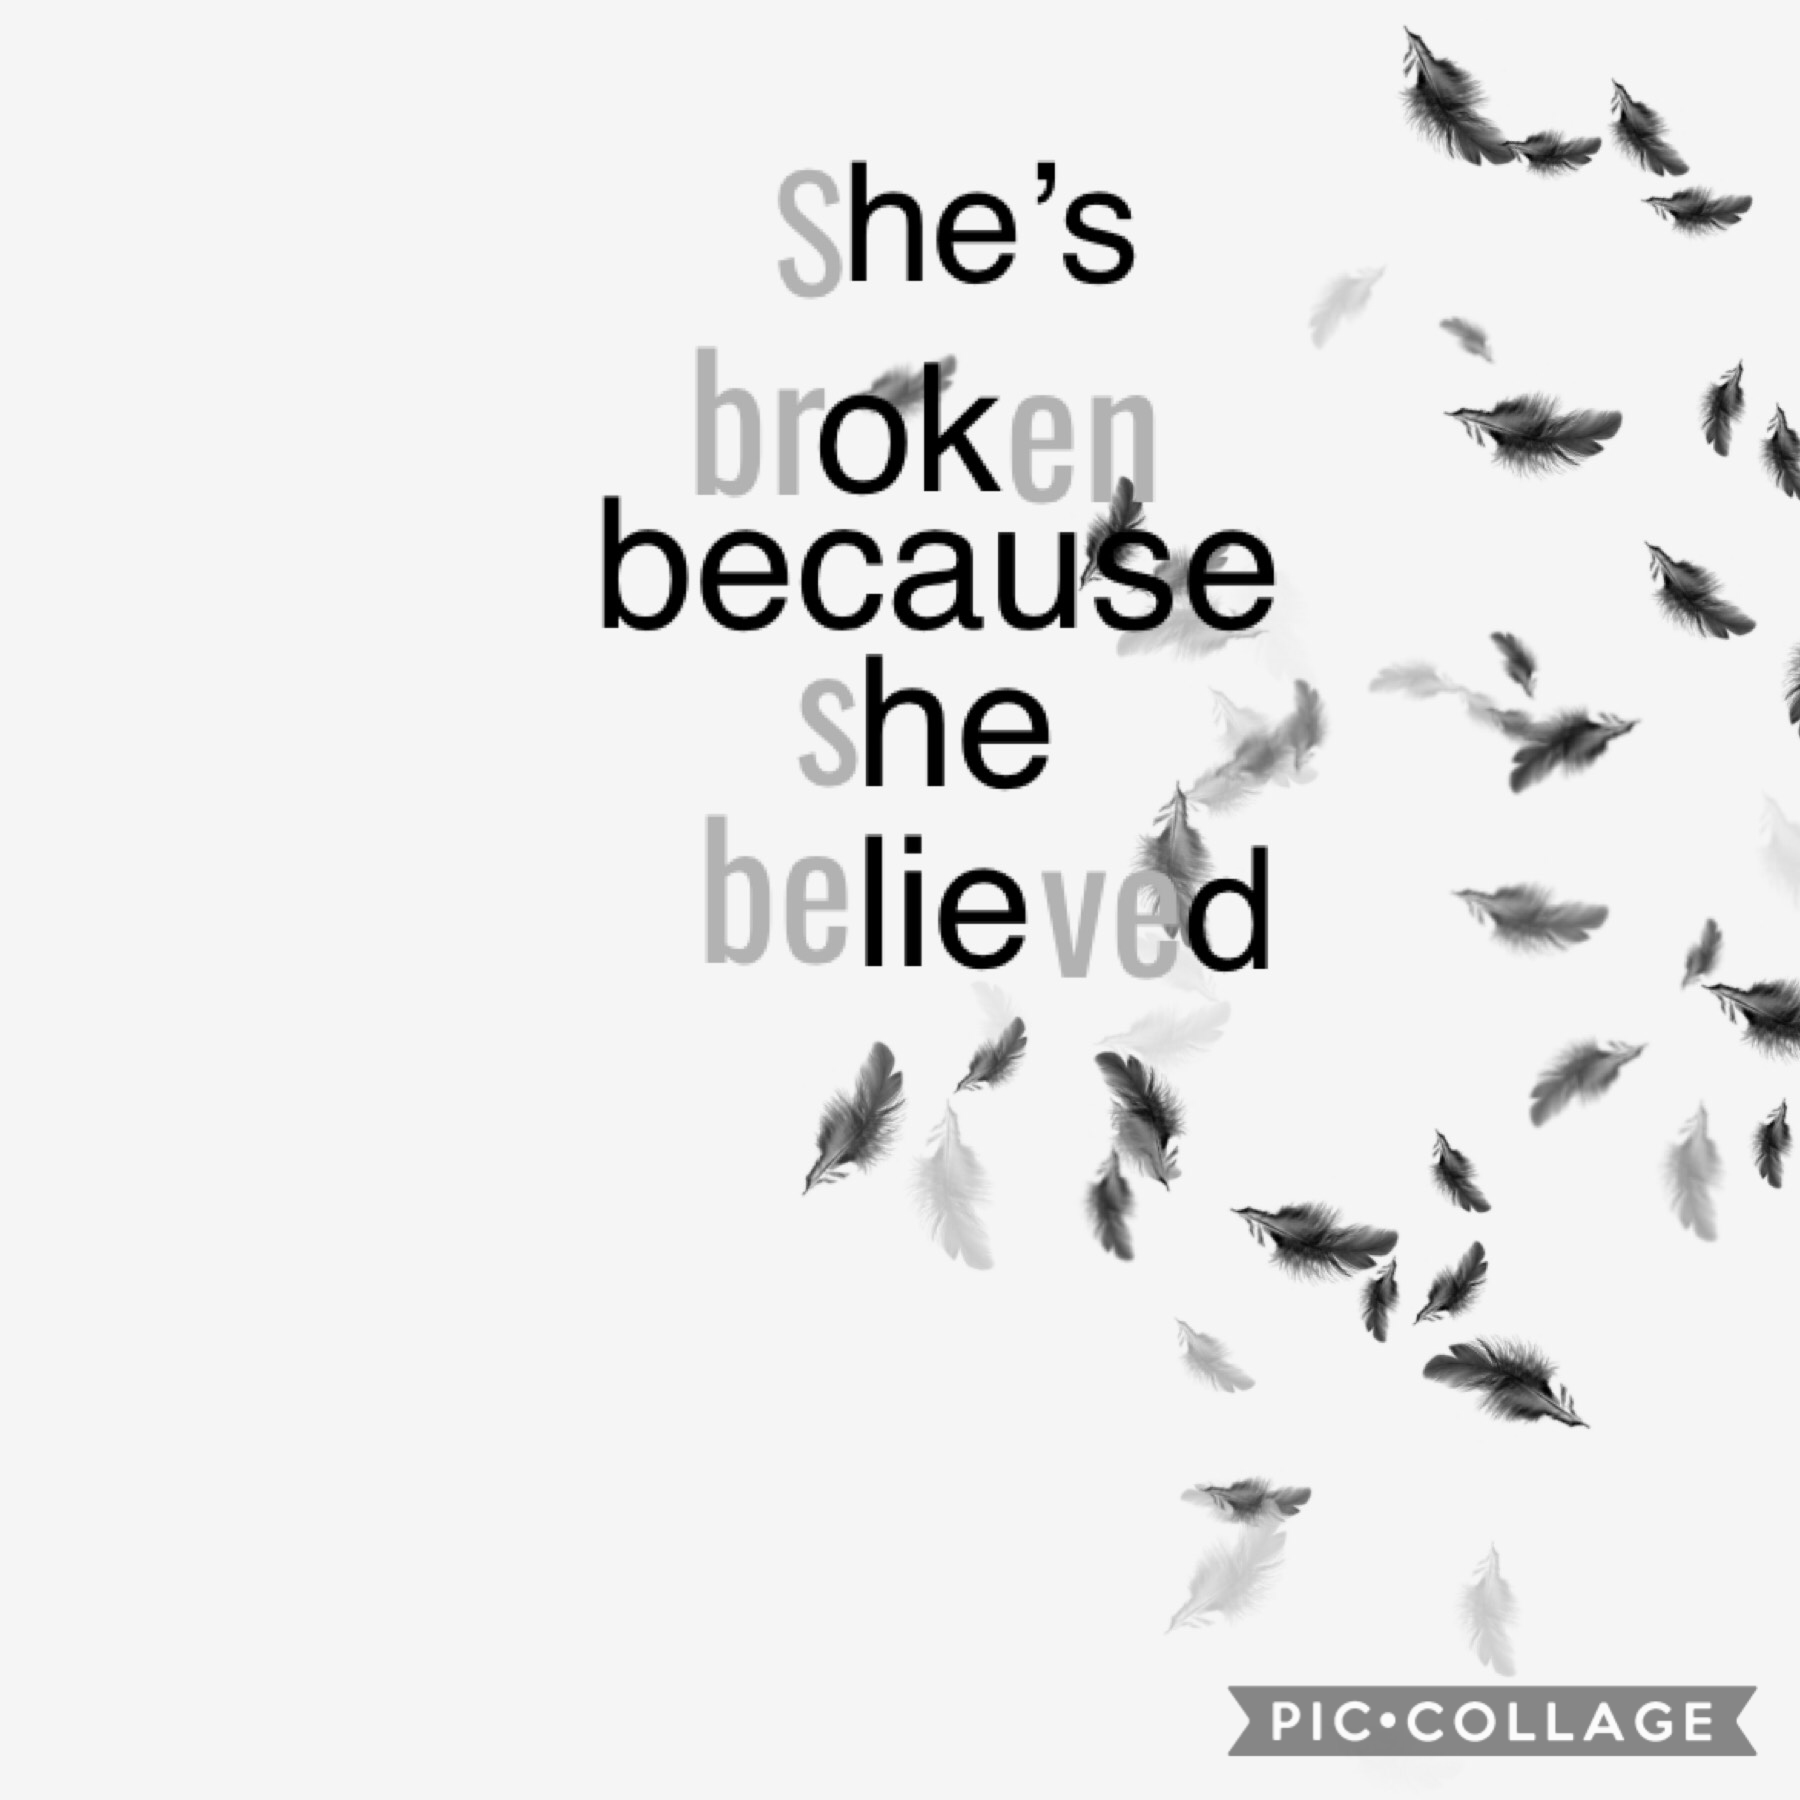 He’s ok because he lied (she’s broken because she believed). 💔
What do you think about this?